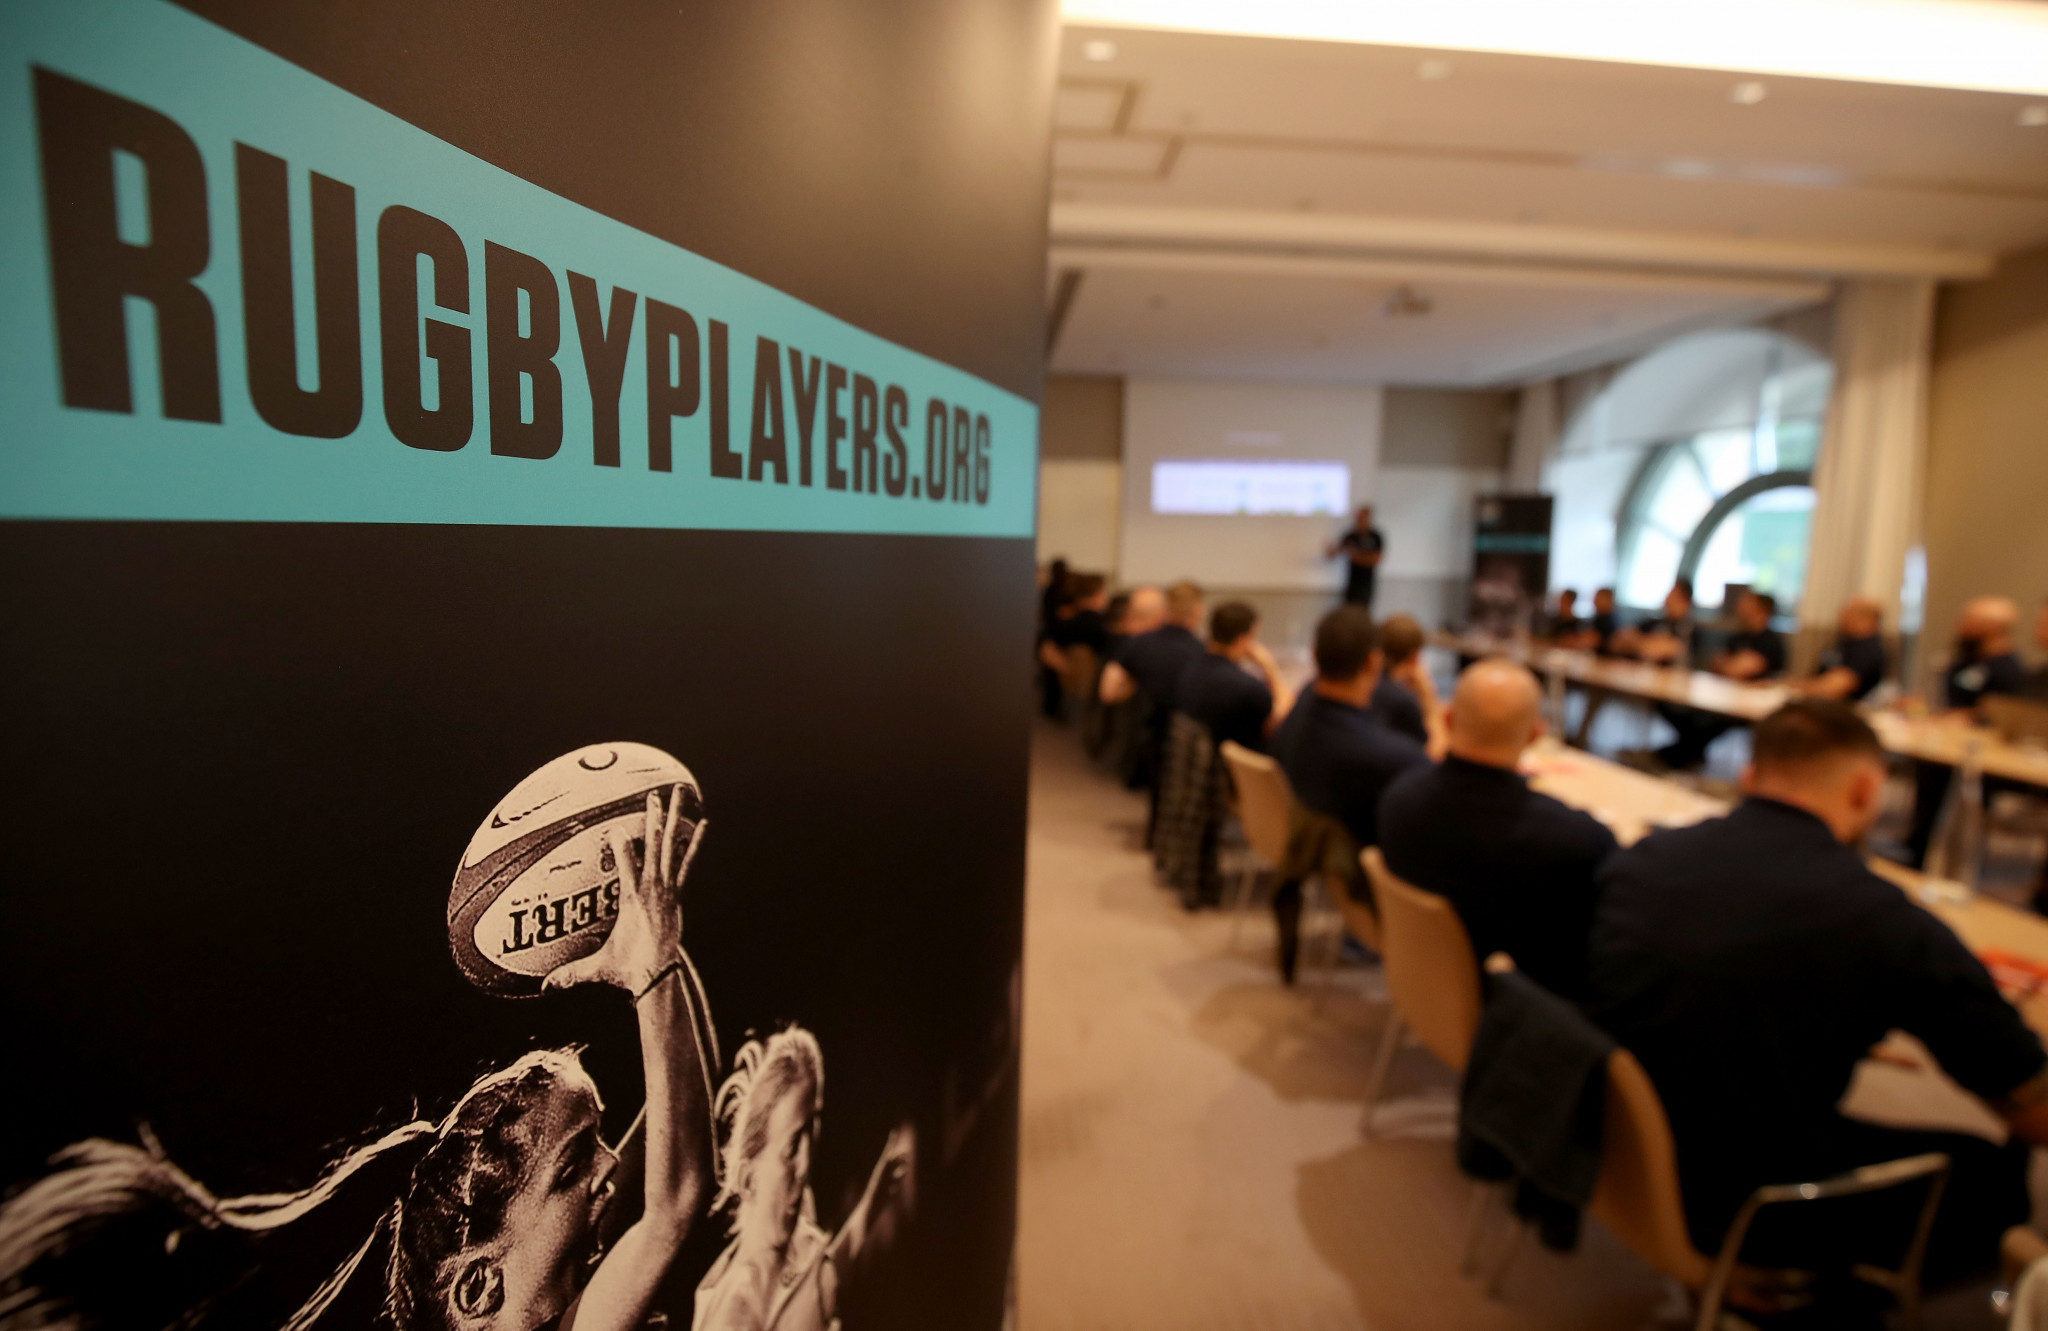  Top players "united in concern" over safety and welfare issues raised by World Rugby’s proposed global format